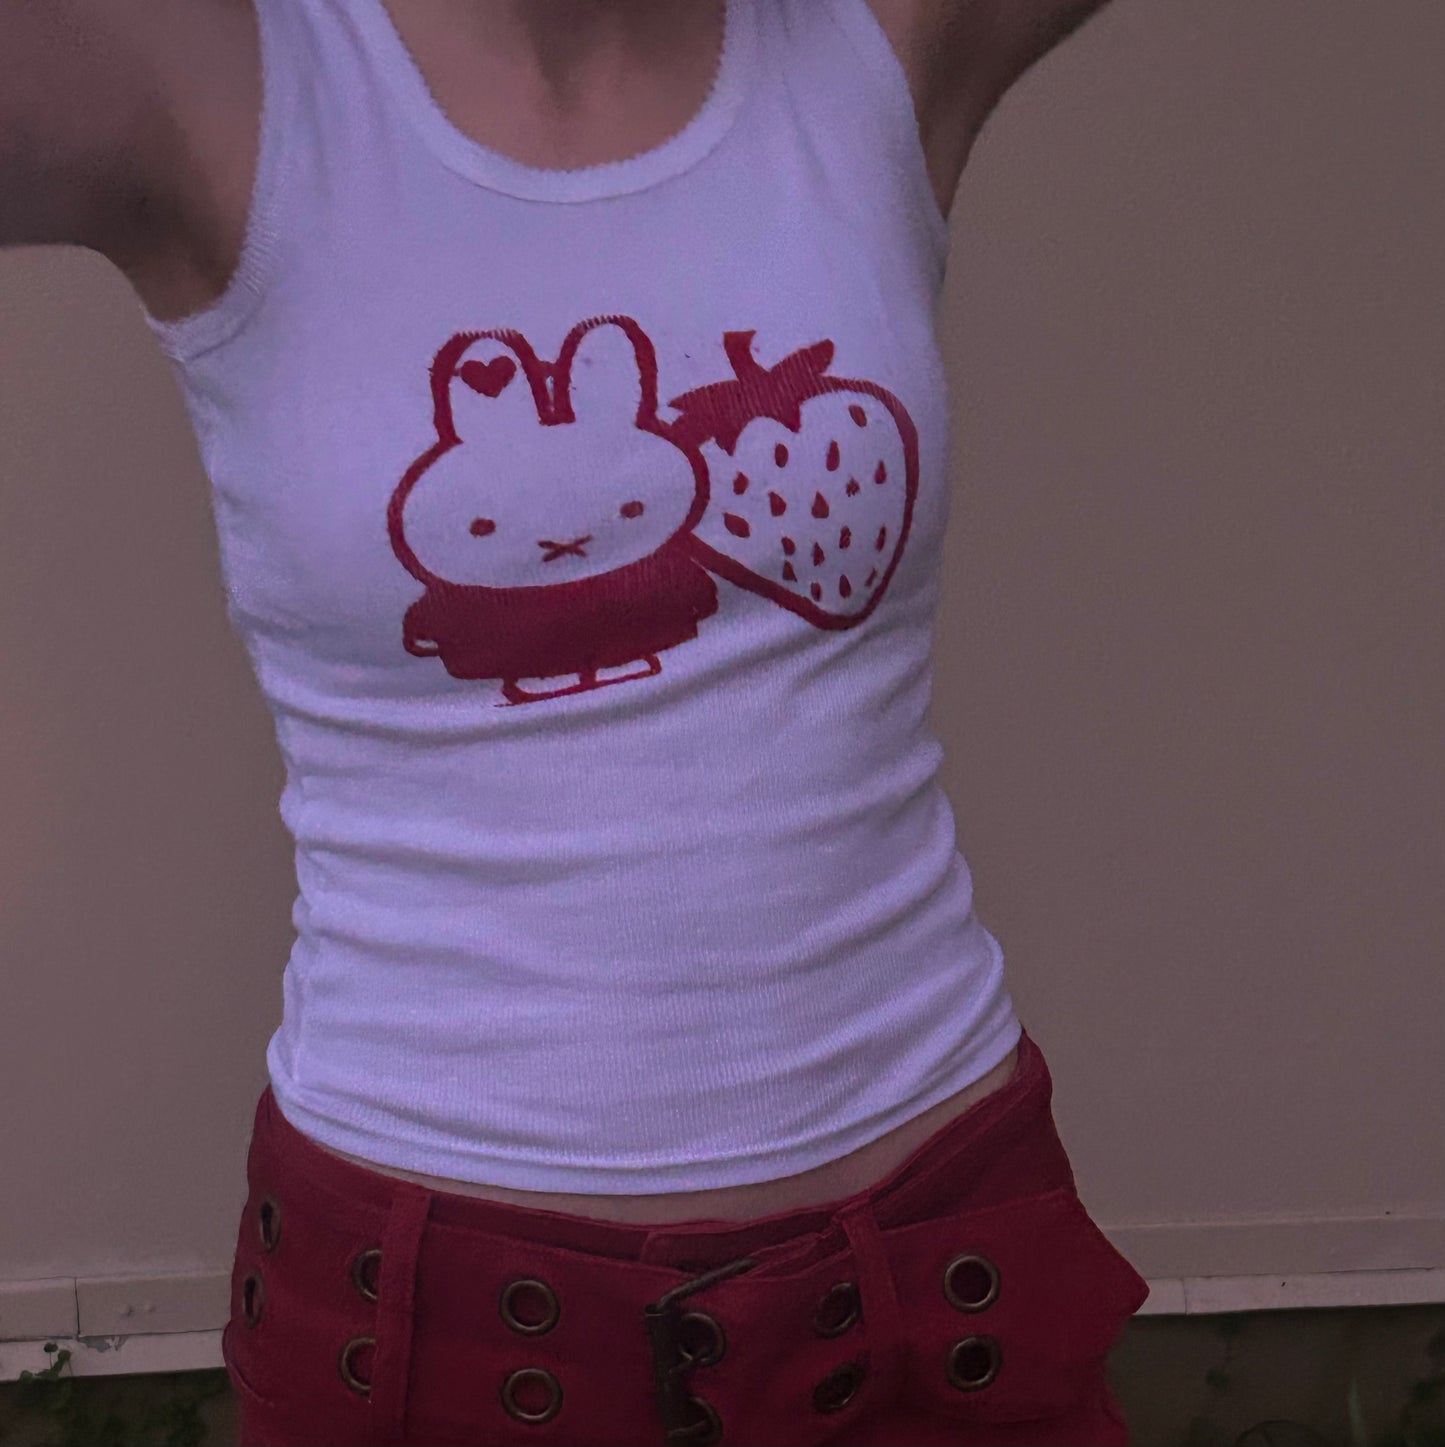 The strawberry miffy tank top in red